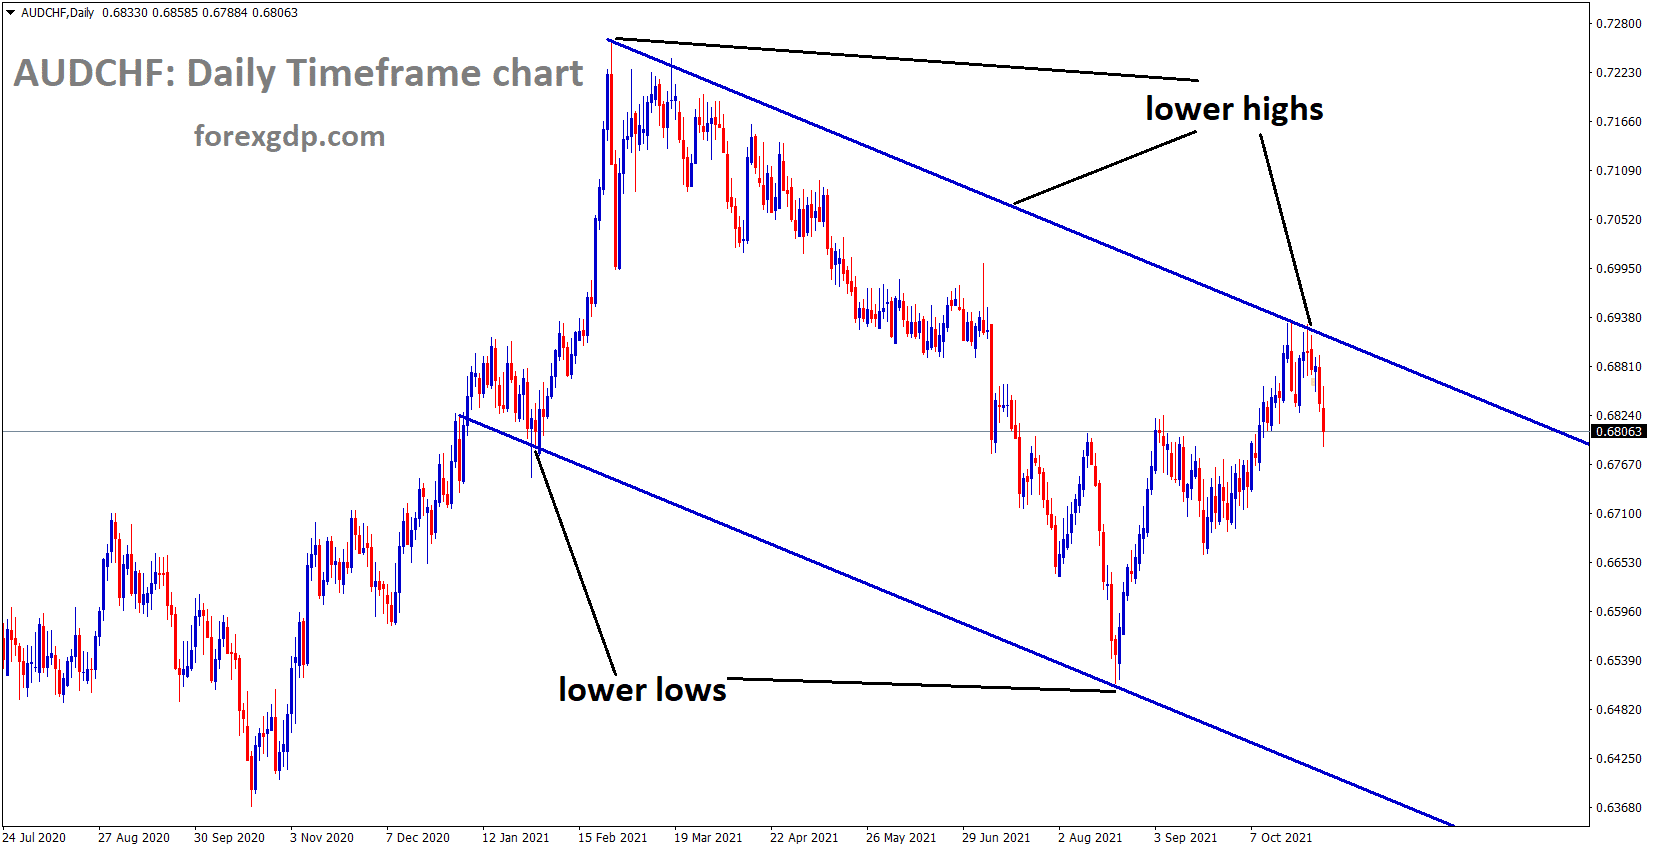 AUDCHF is moving in the Descending channel and fell from the Lower higher area of the channel